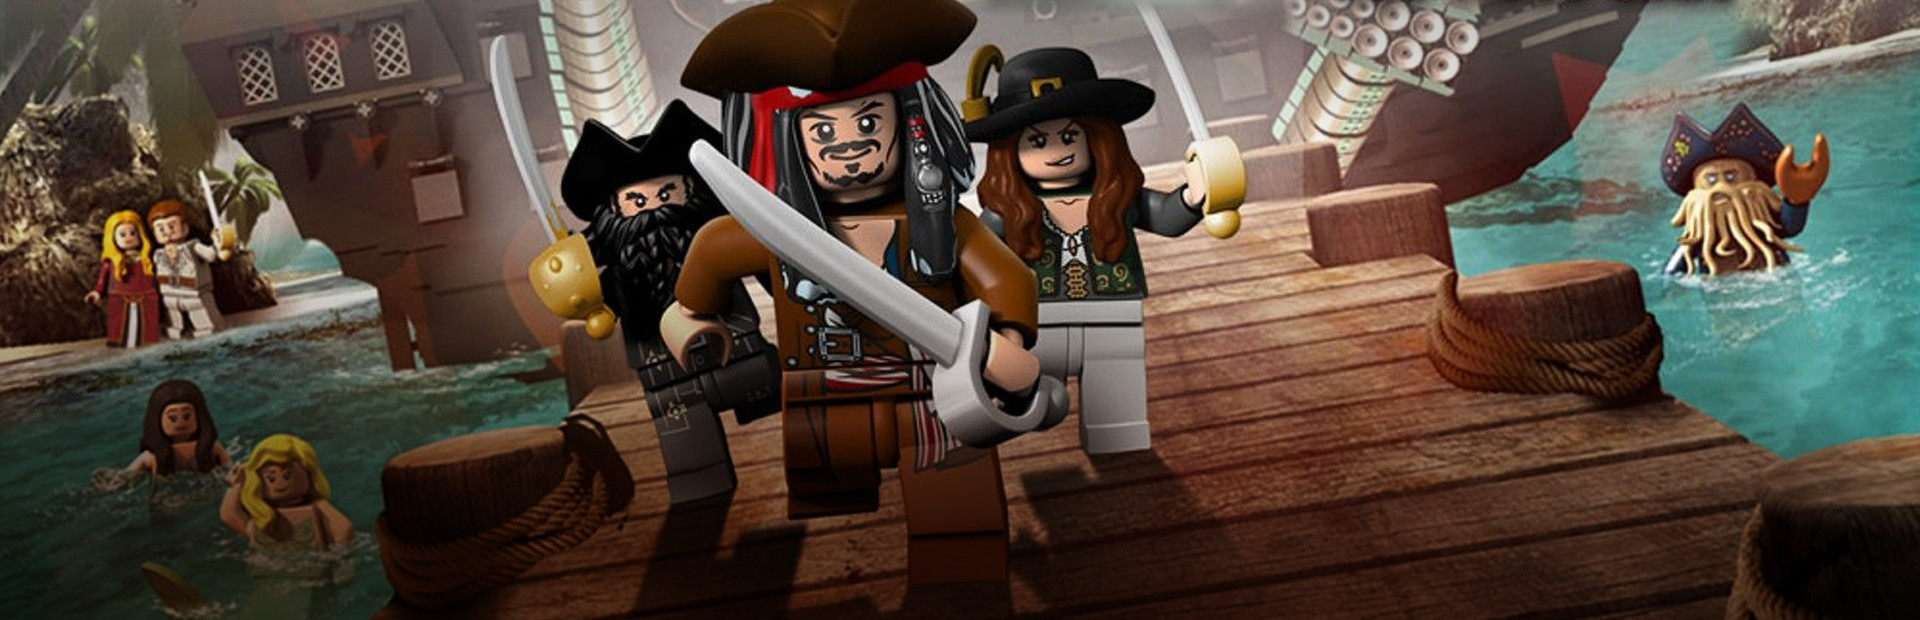 LEGO® Pirates of the Caribbean: The Video Game cover image